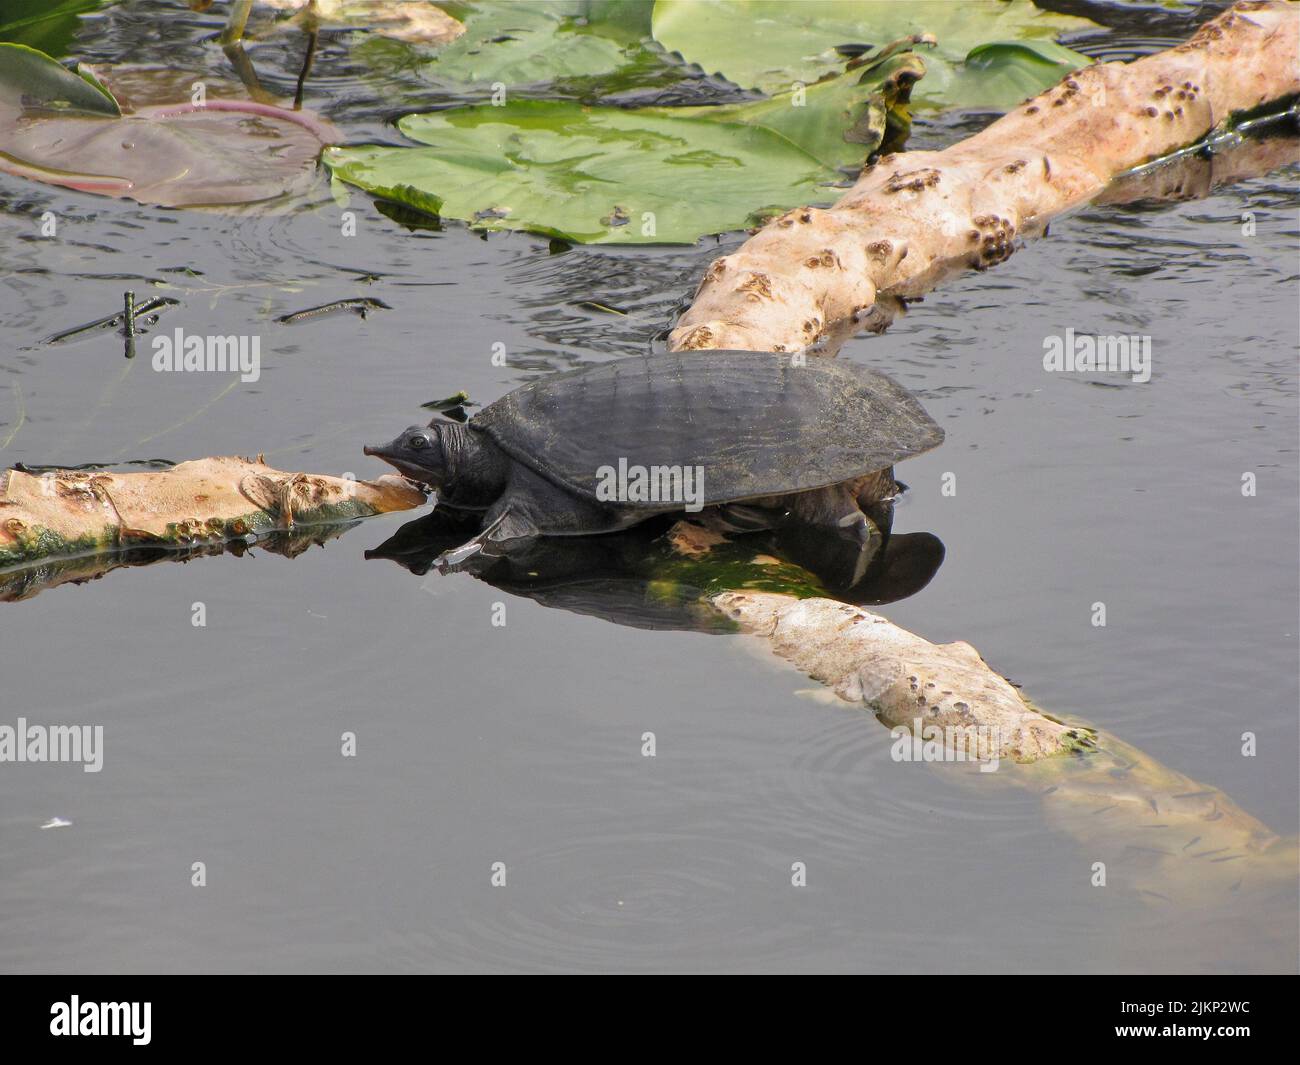 A beautiful shot of Florida softshell turtle sitting on a floating tree trunk in the water during daytime by floating lotus leaves Stock Photo